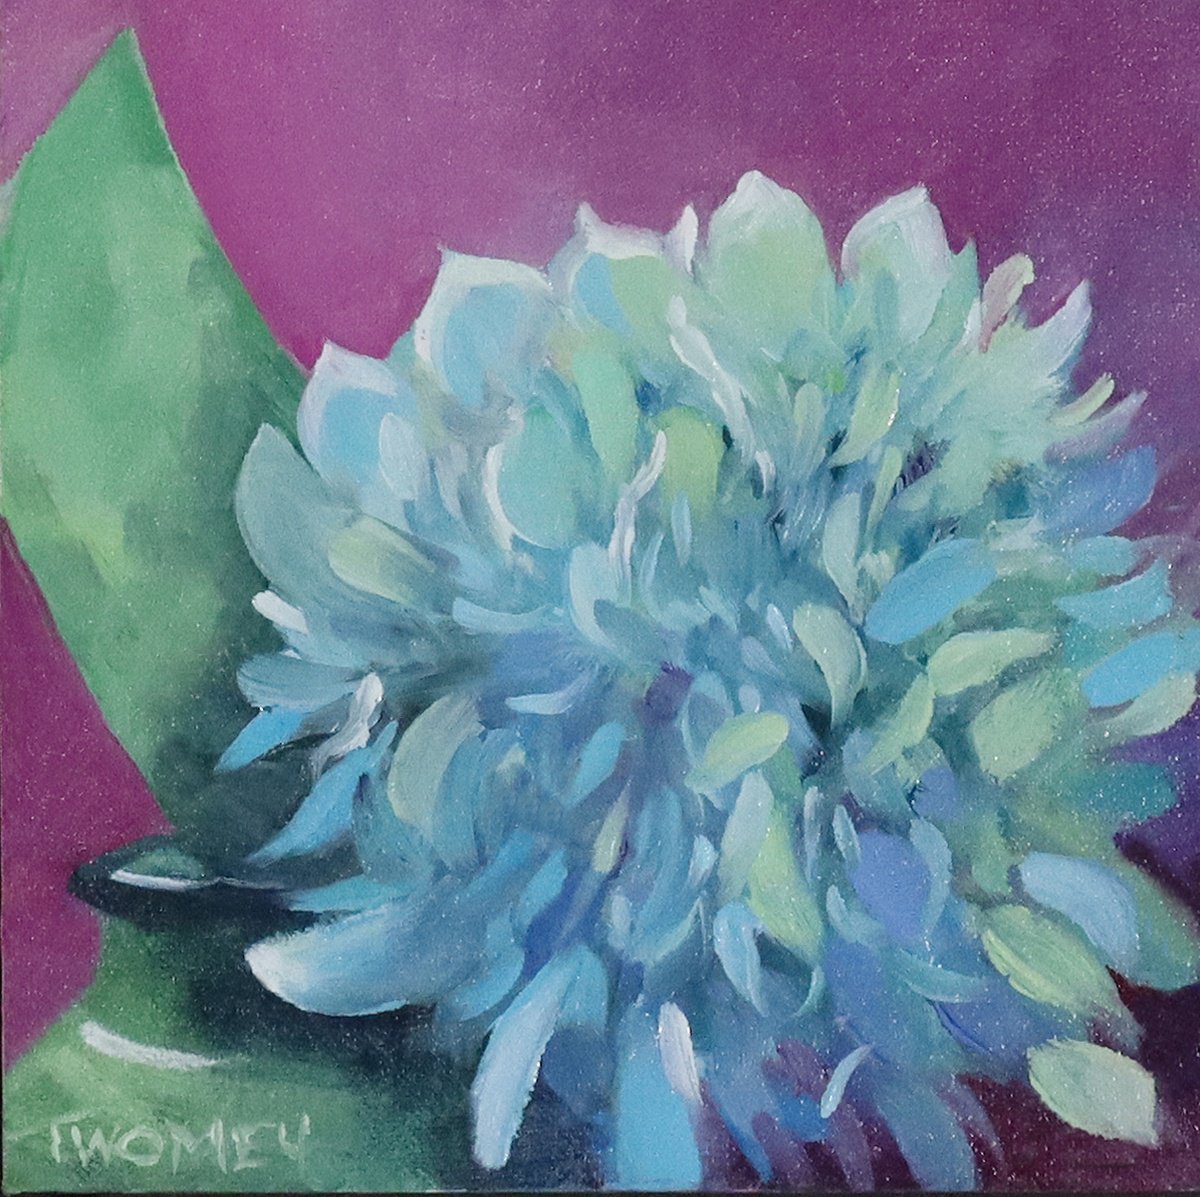 The Blue Hydrangea by Catherine Twomey